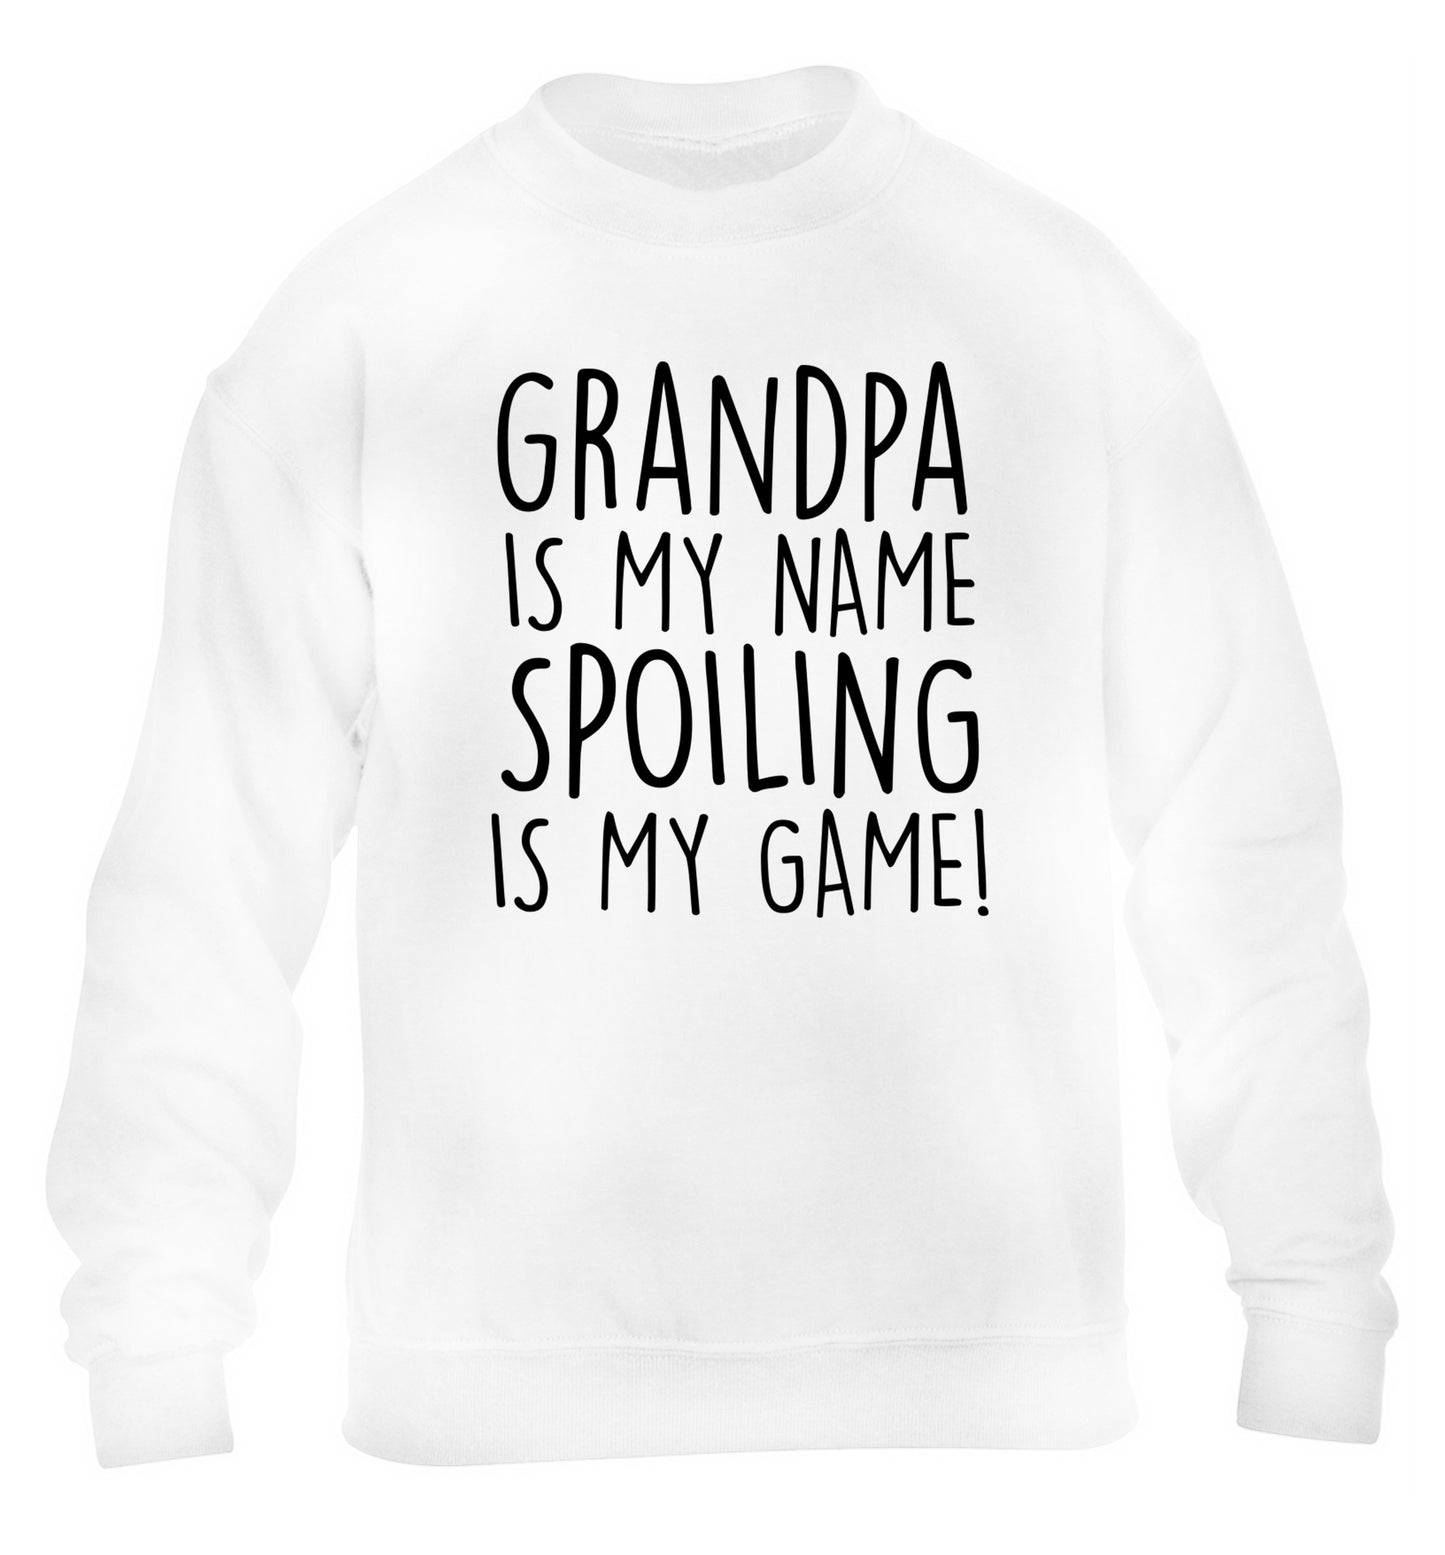 Grandpa is my name, spoiling is my game children's white sweater 12-14 Years